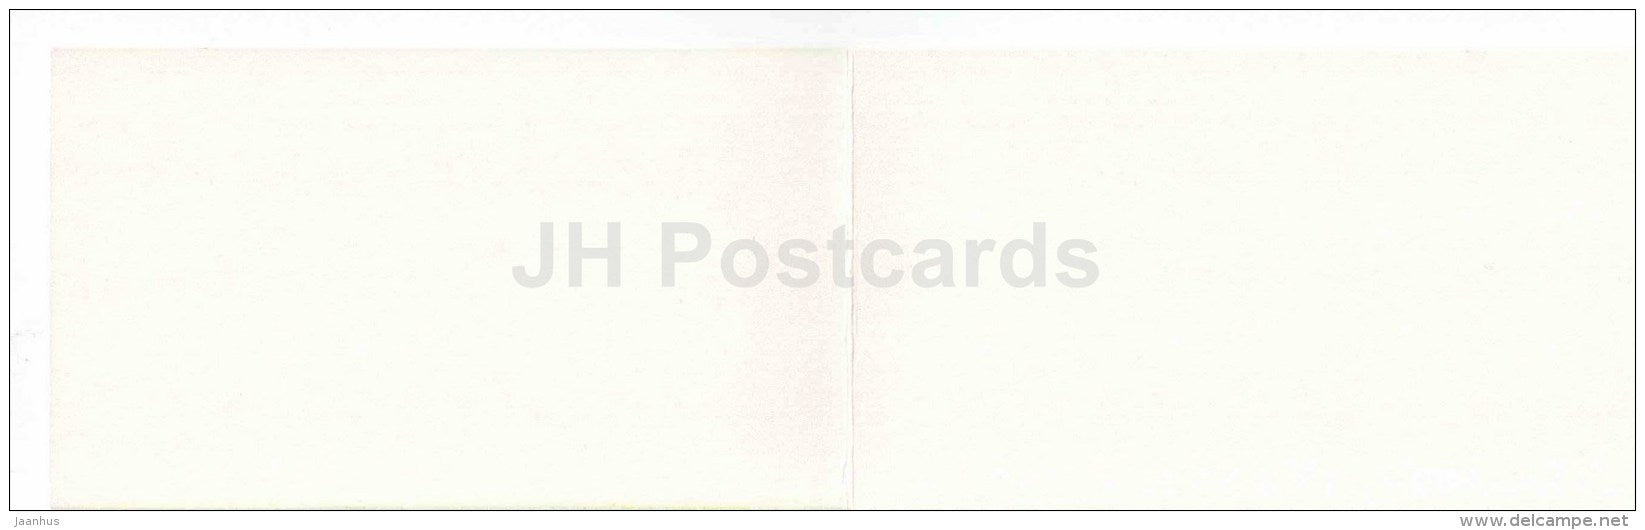 New Year mini greeting card by V. Gorelov - fir tree - cones - 1989 - Russia USSR - unused - JH Postcards